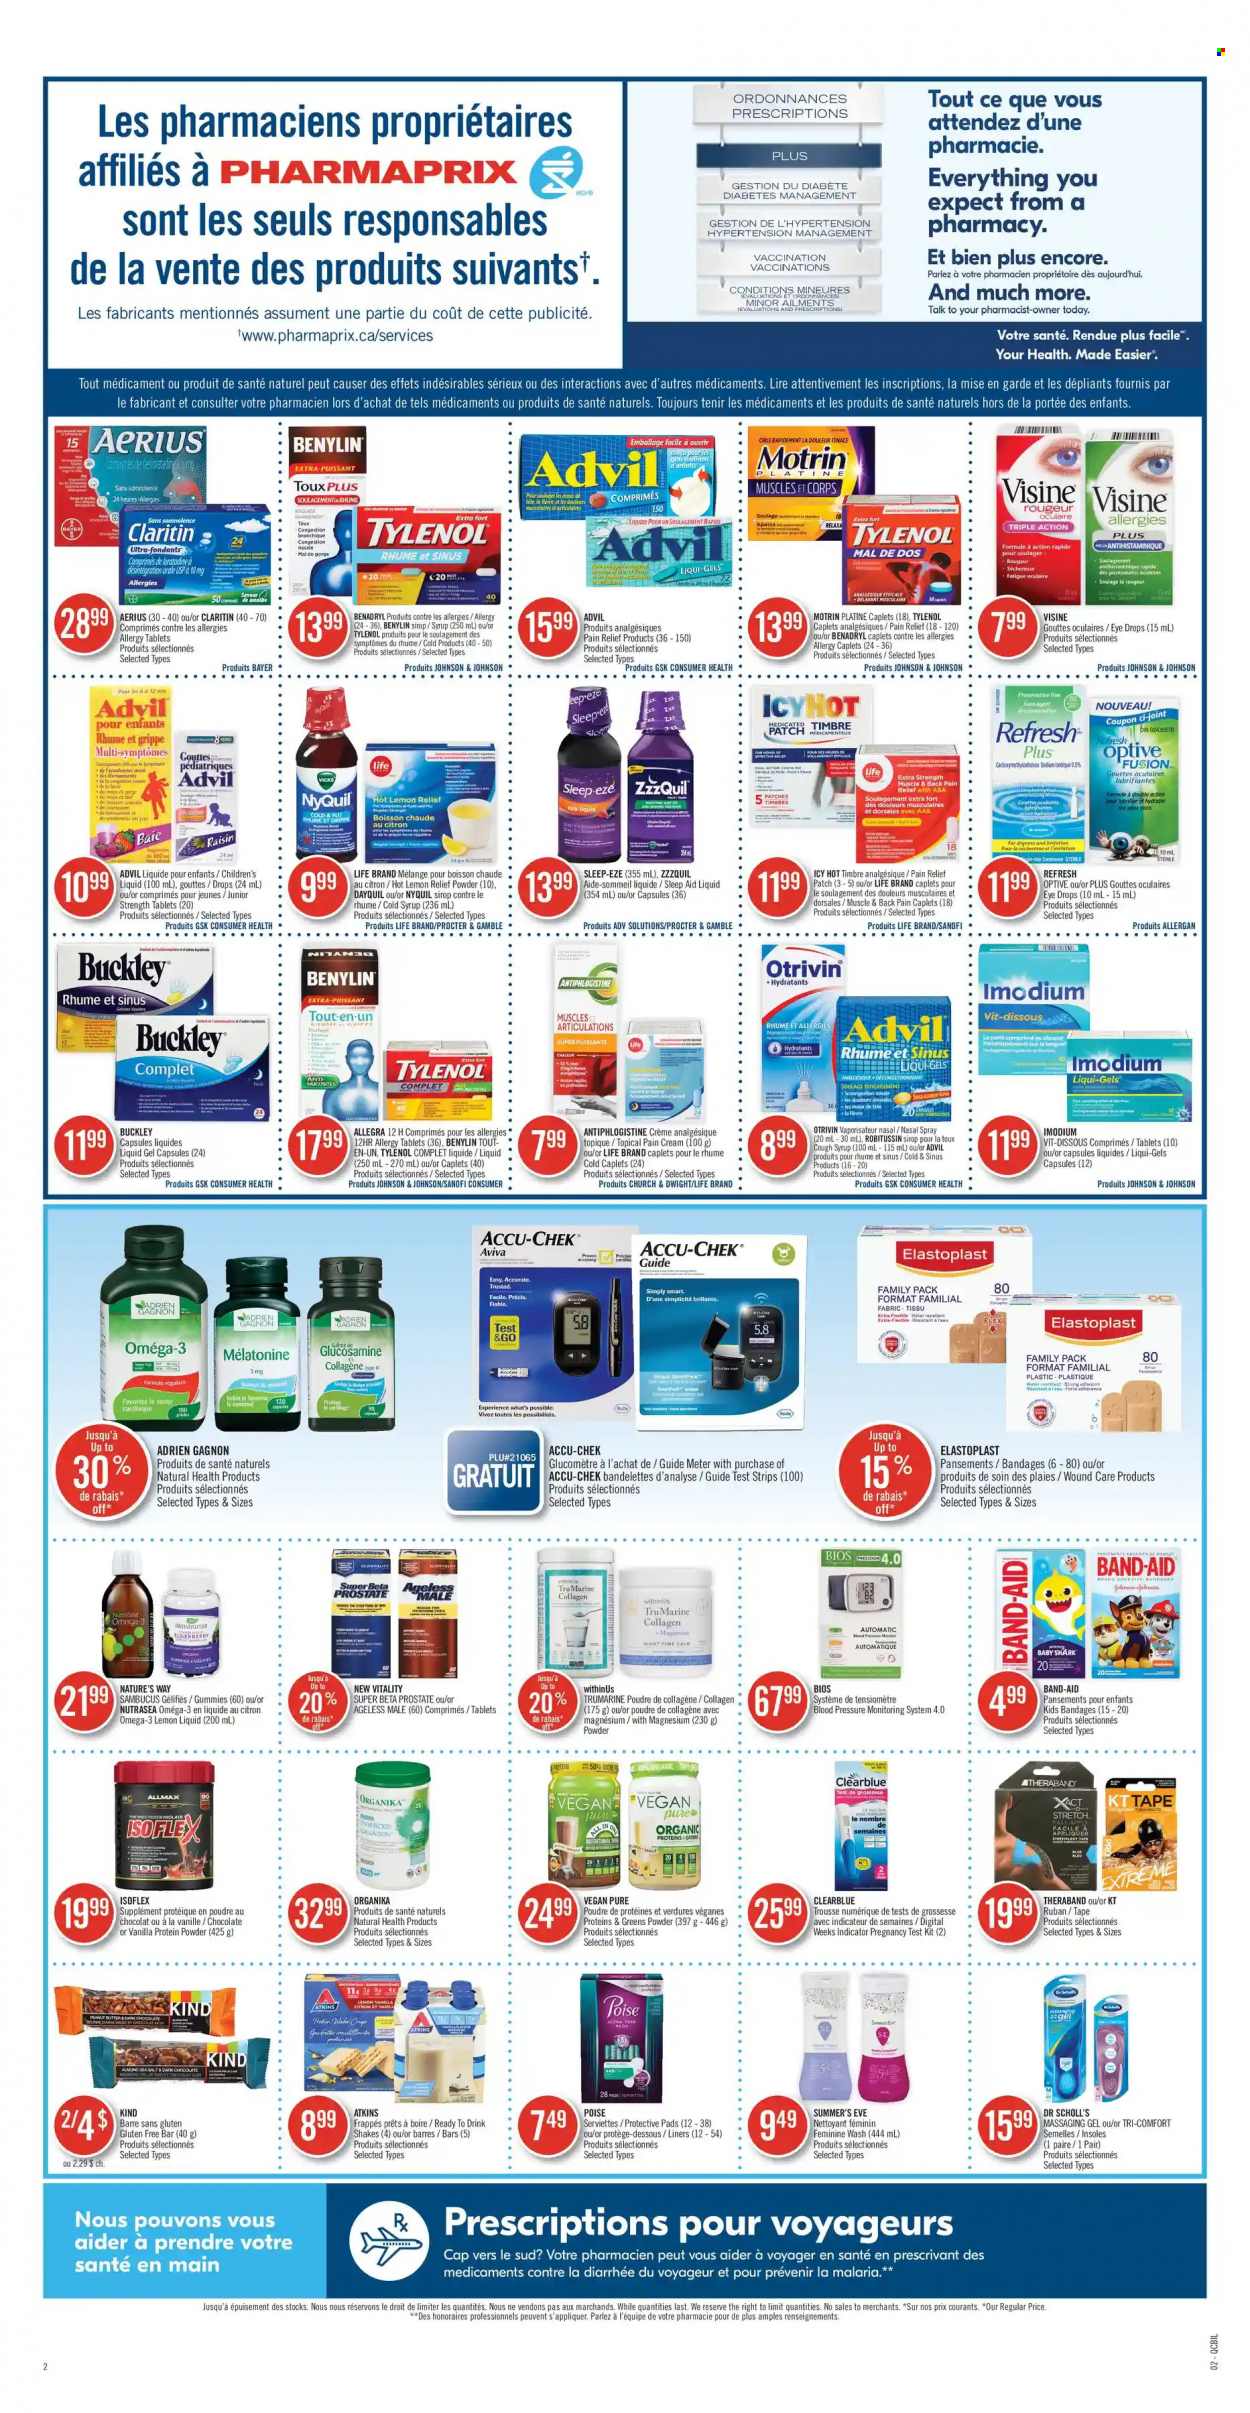 thumbnail - Pharmaprix Flyer - September 25, 2021 - October 01, 2021 - Sales products - shake, chocolate, dark chocolate, sea salt, syrup, Johnson's, repellent, pain relief, DayQuil, glucosamine, magnesium, Tylenol, ZzzQuil, NyQuil, Omega-3, eye drops, Advil Rapid, whey protein, Bayer, Benylin, nasal spray, Motrin, Dr. Scholl's, band-aid, Robitussin, Imodium. Page 2.